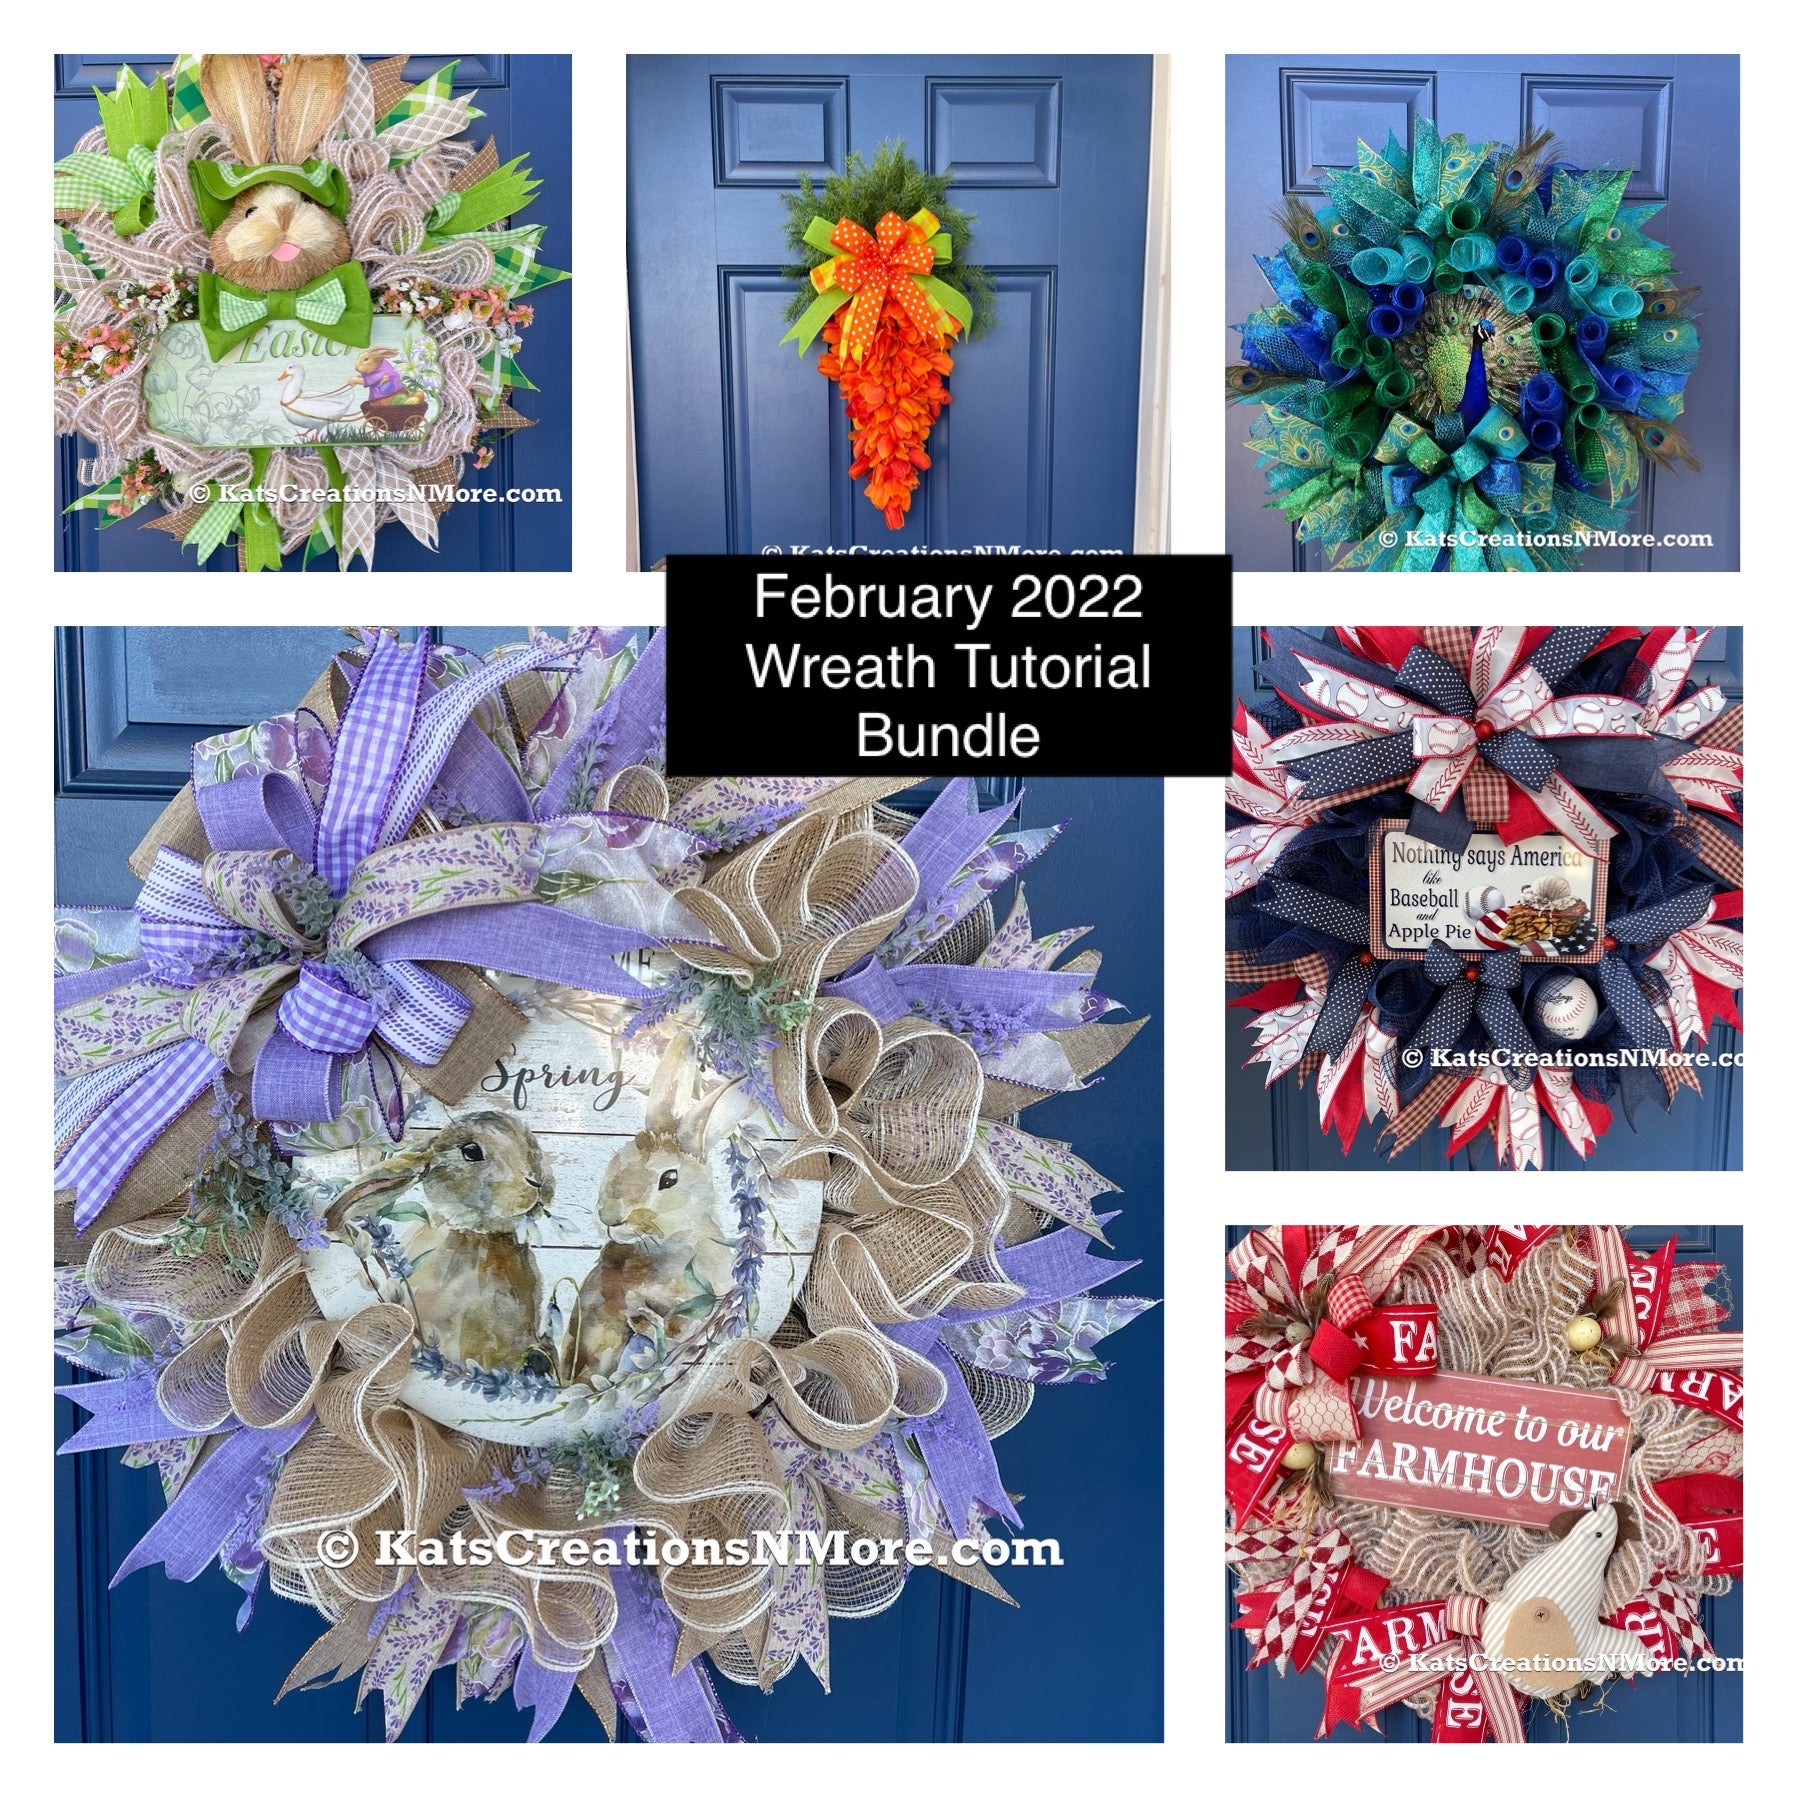 Photo of the wreath designs that are available in the February 2022 wreath tutorial bundle